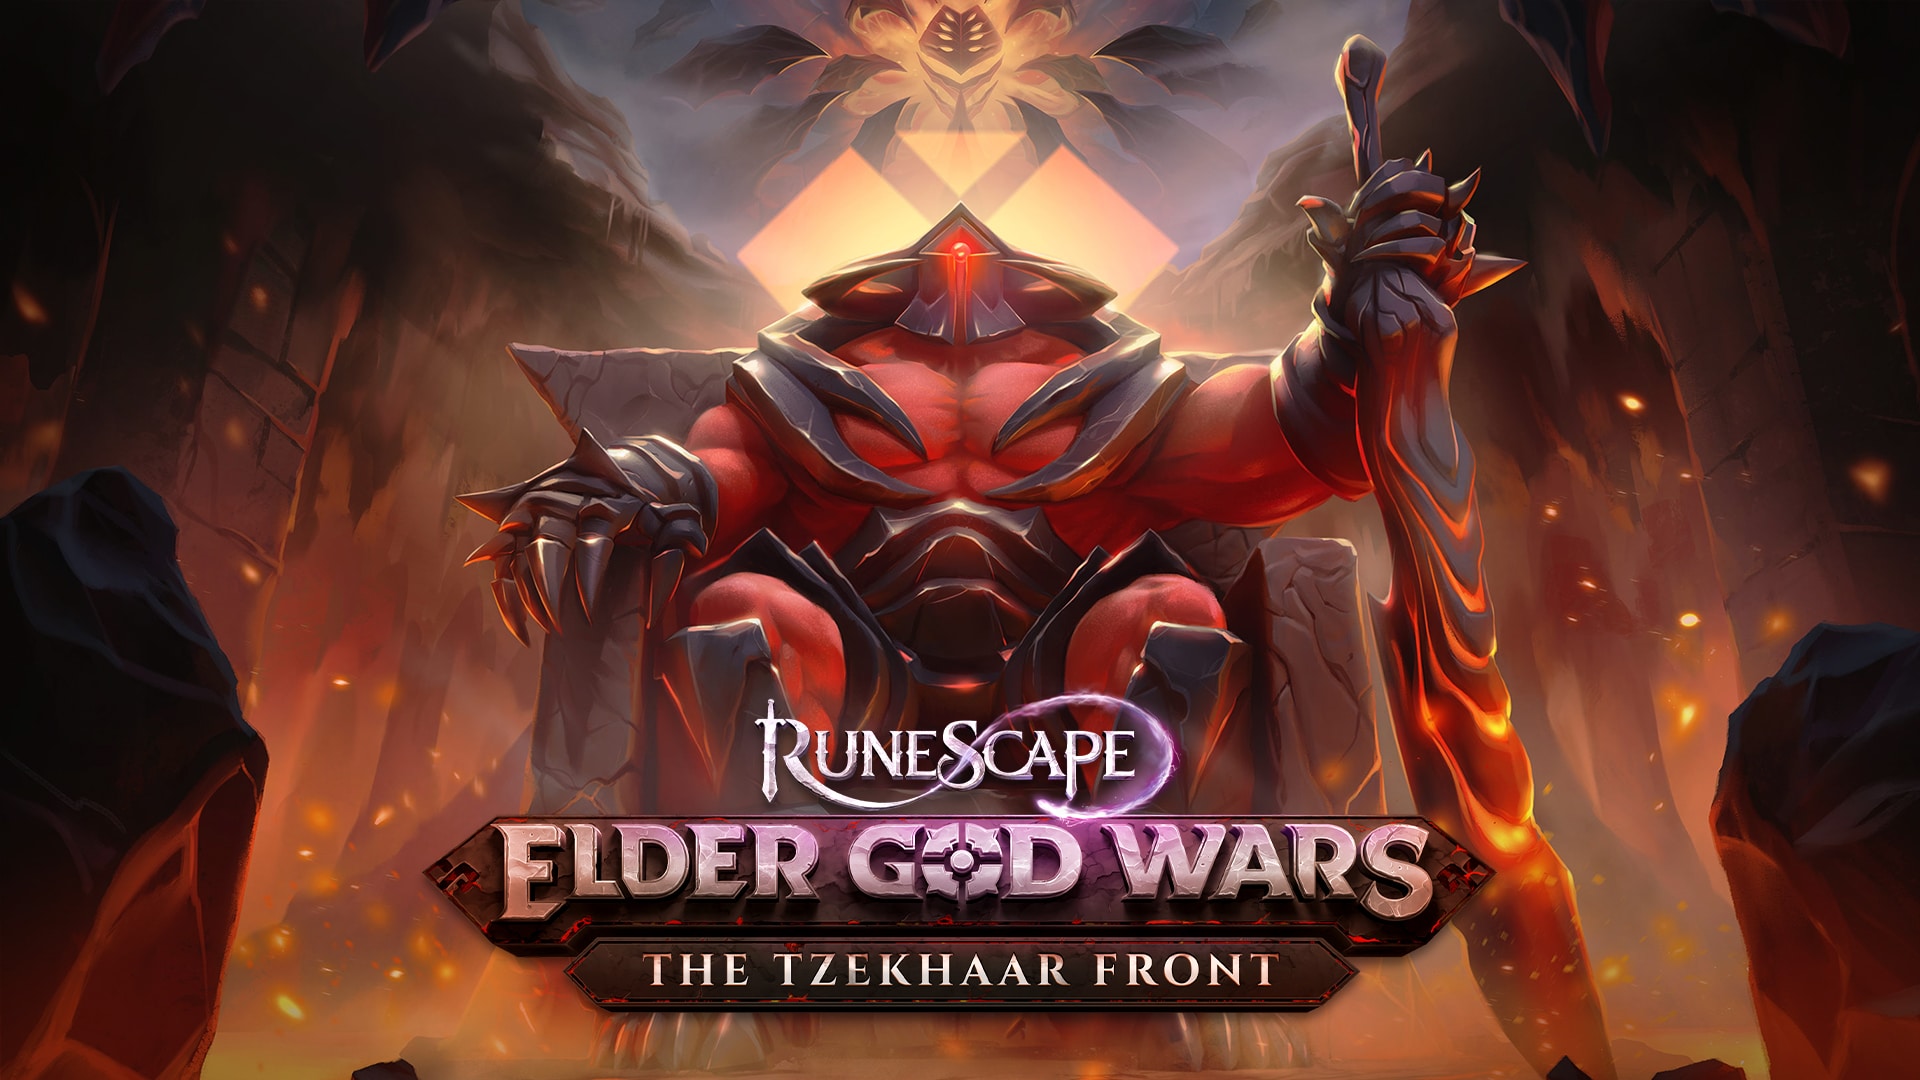 What You Need to Know About The TzekHaar Front from RuneScape's Elder God Wars thumbnail